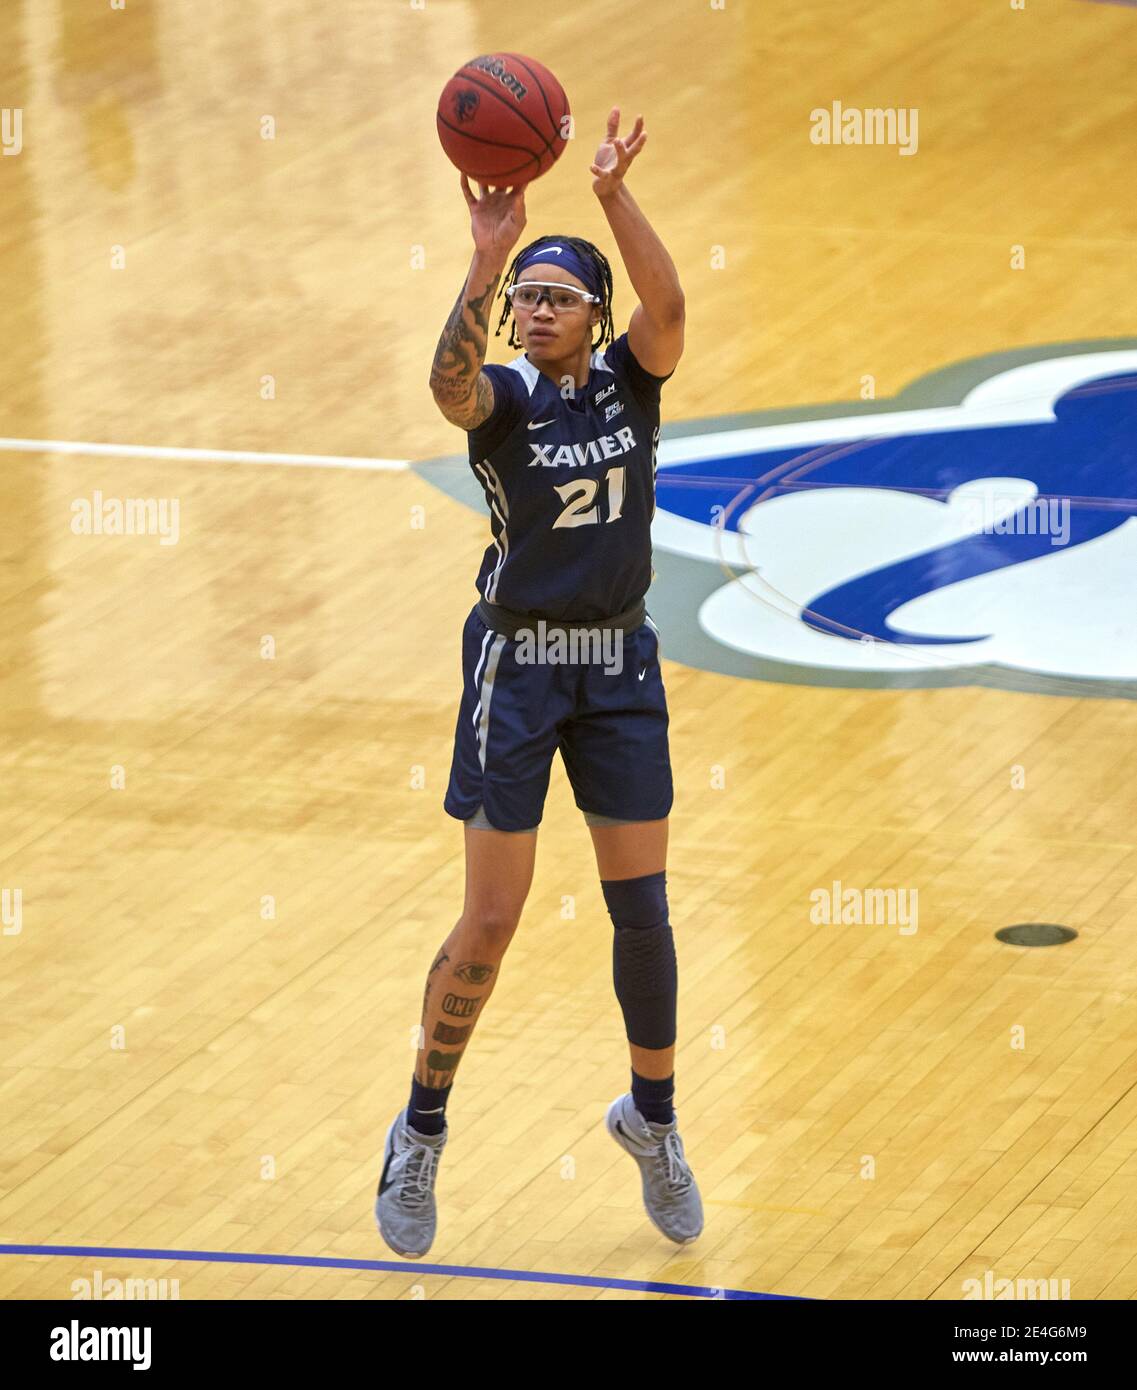 South Orange, New Jersey, USA. 23rd Jan, 2021. Xavier Musketeers forward A'Riana Gray (21) shoots a three point attempt in the second half at Walsh Gymnasium in South Orange, New Jersey. Seton Hall defeated Xavier 85-59. Duncan Williams/CSM/Alamy Live News Stock Photo